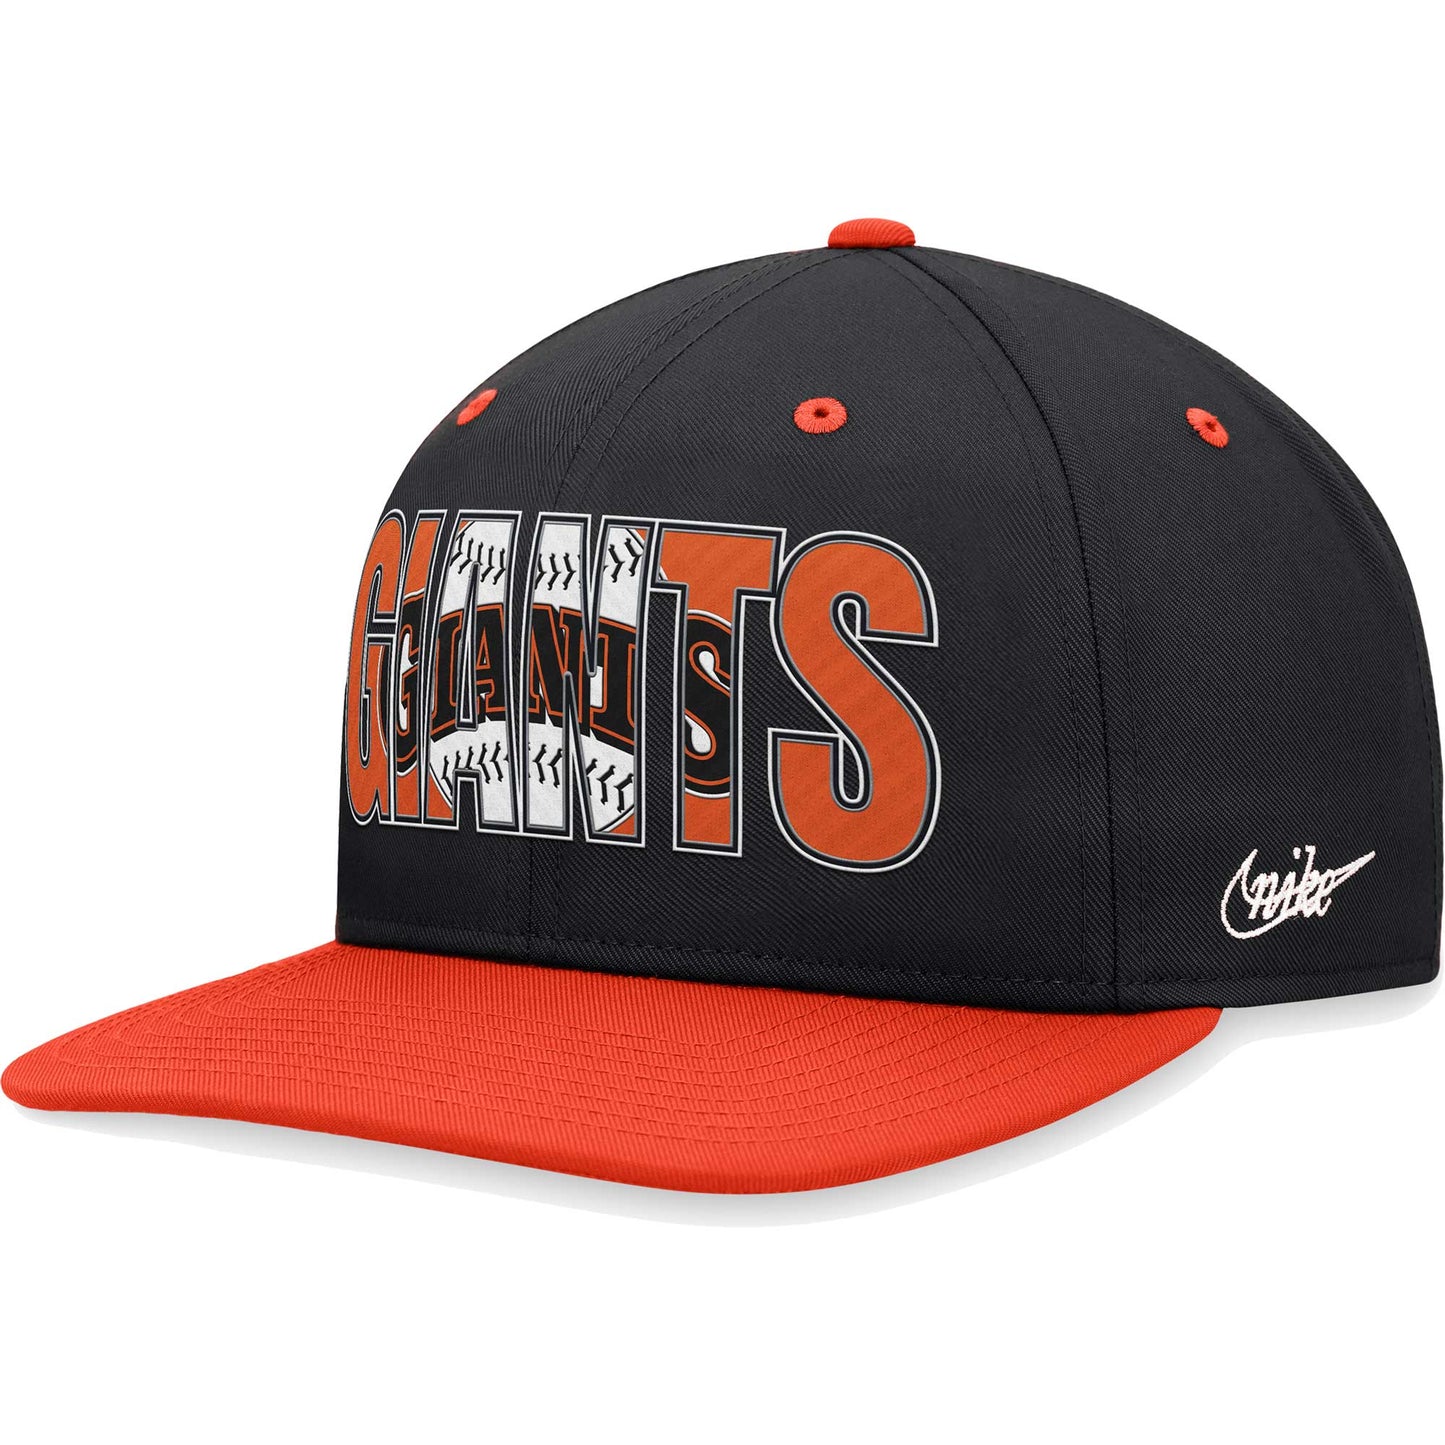 San Francisco Giants Nike Cooperstown Collection Pro Snapback Hat - Black